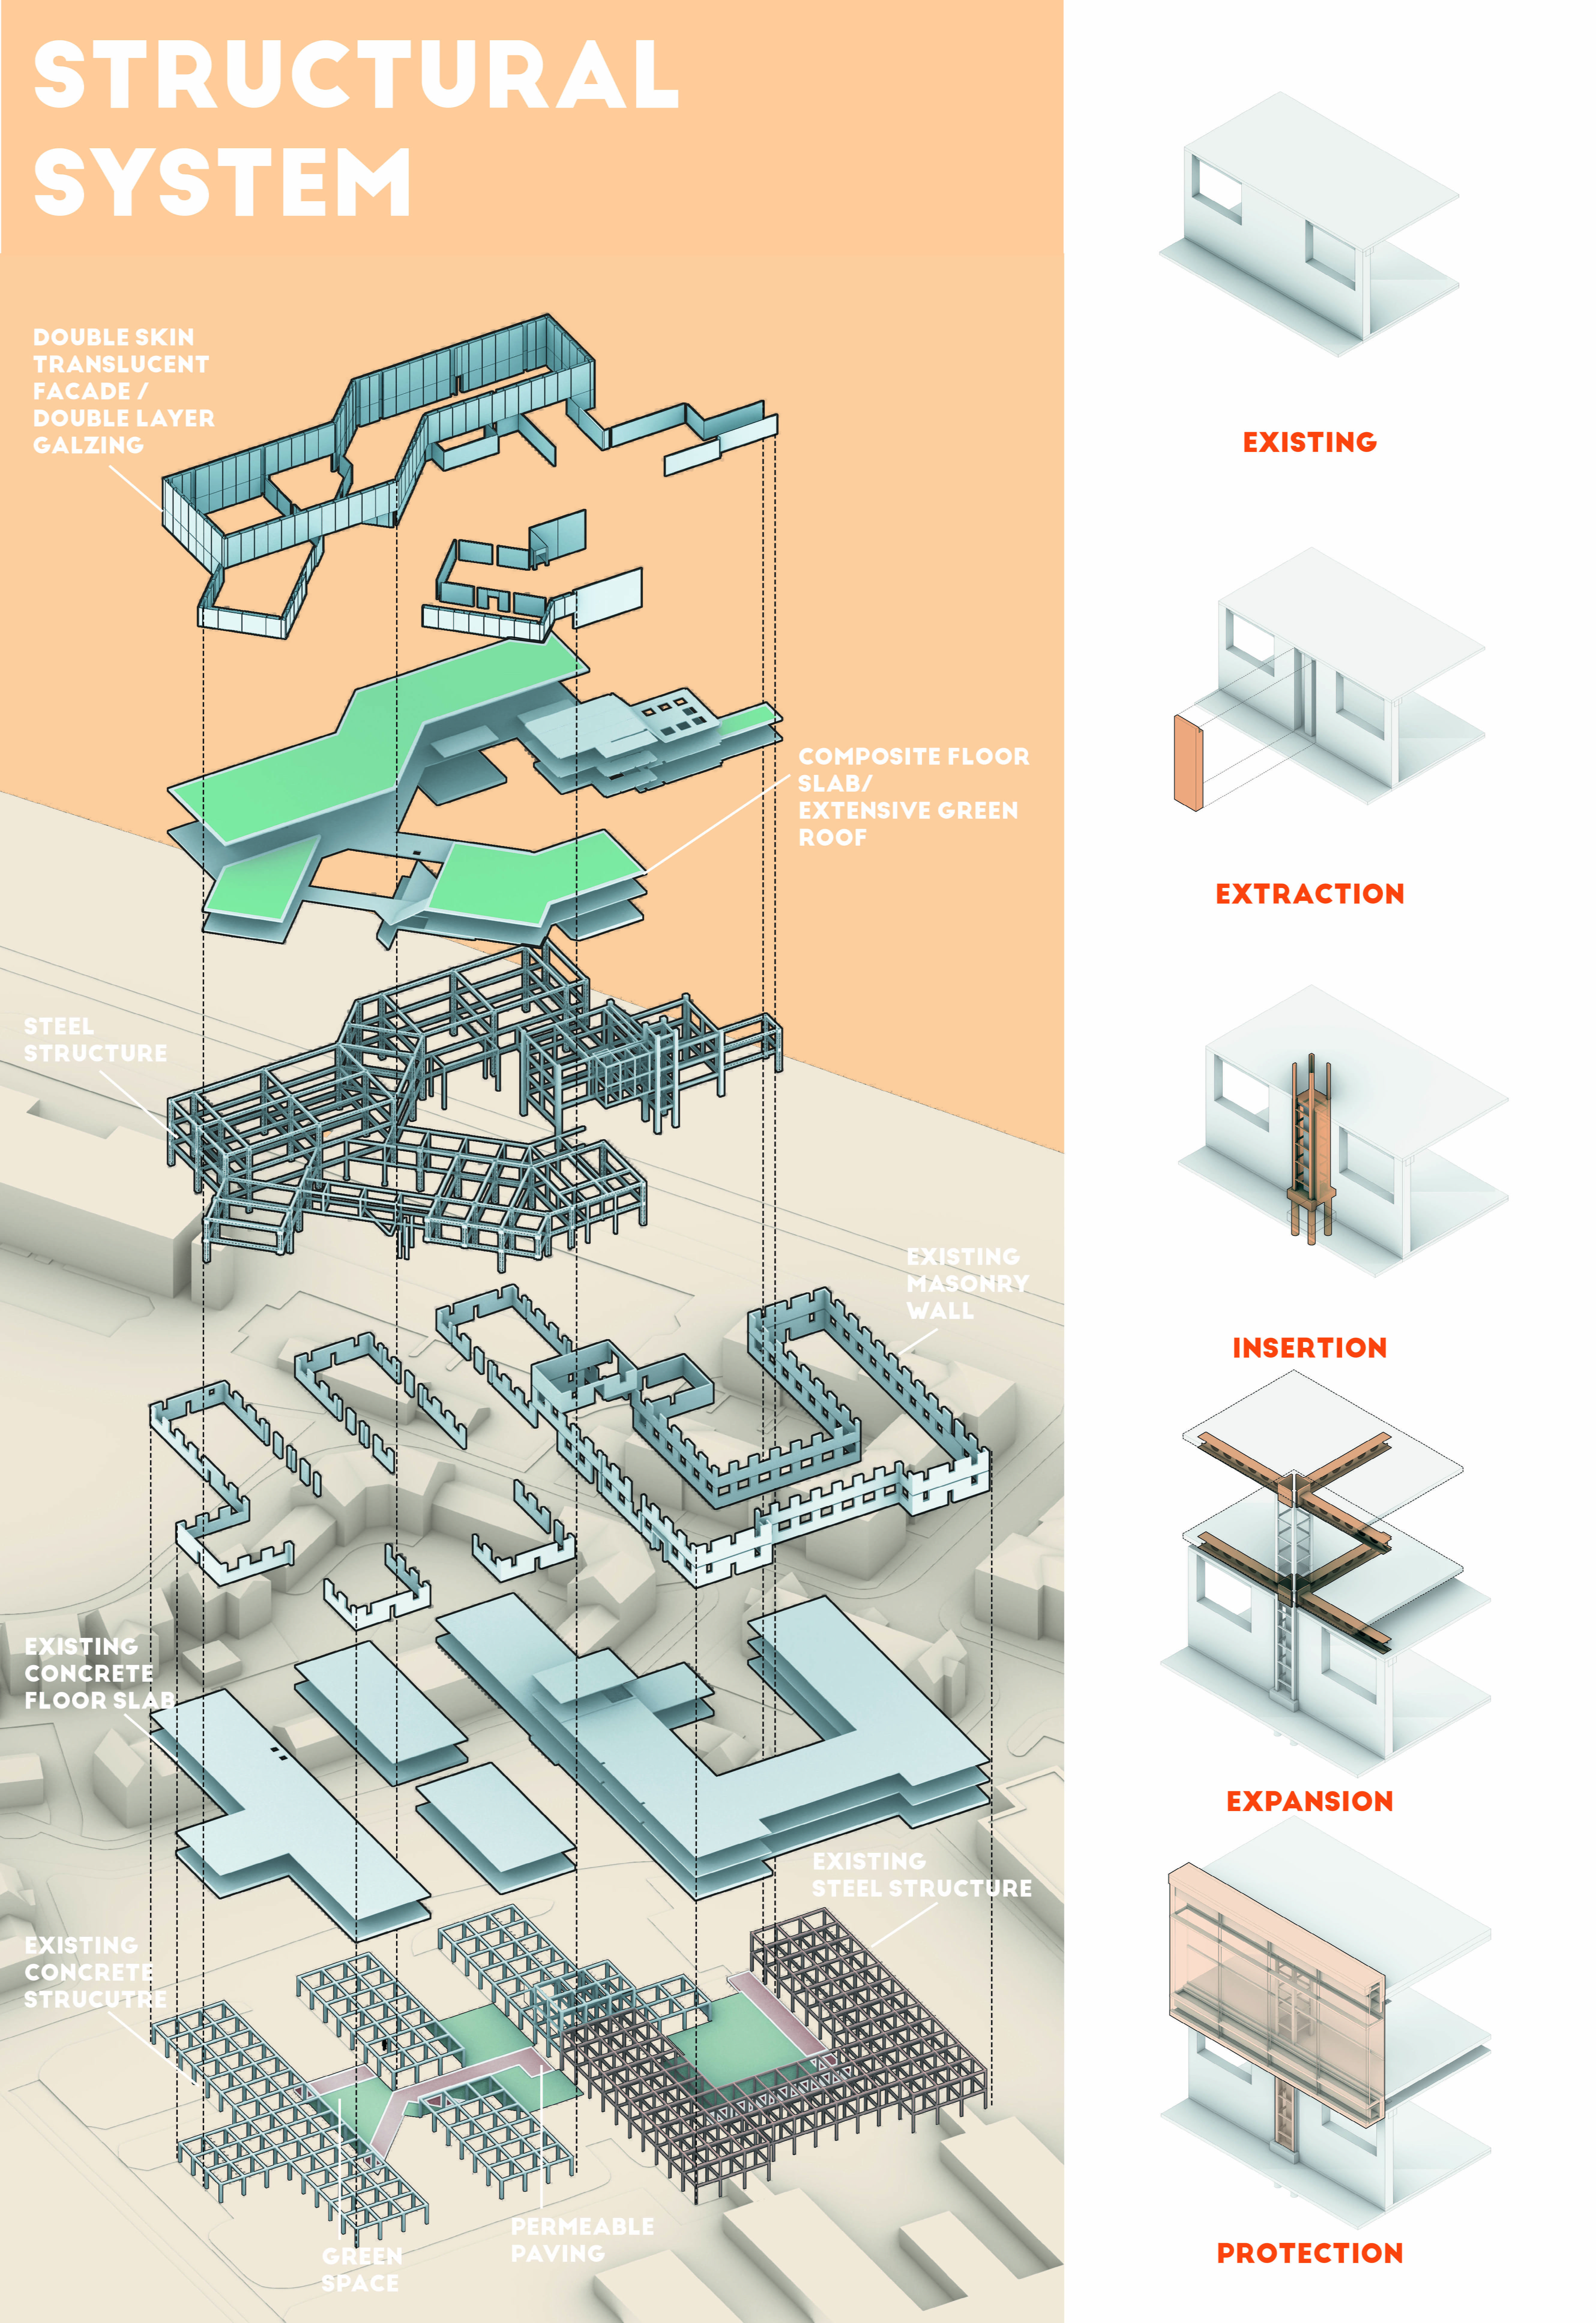 An isometrical structural system detailing different sections of the building.